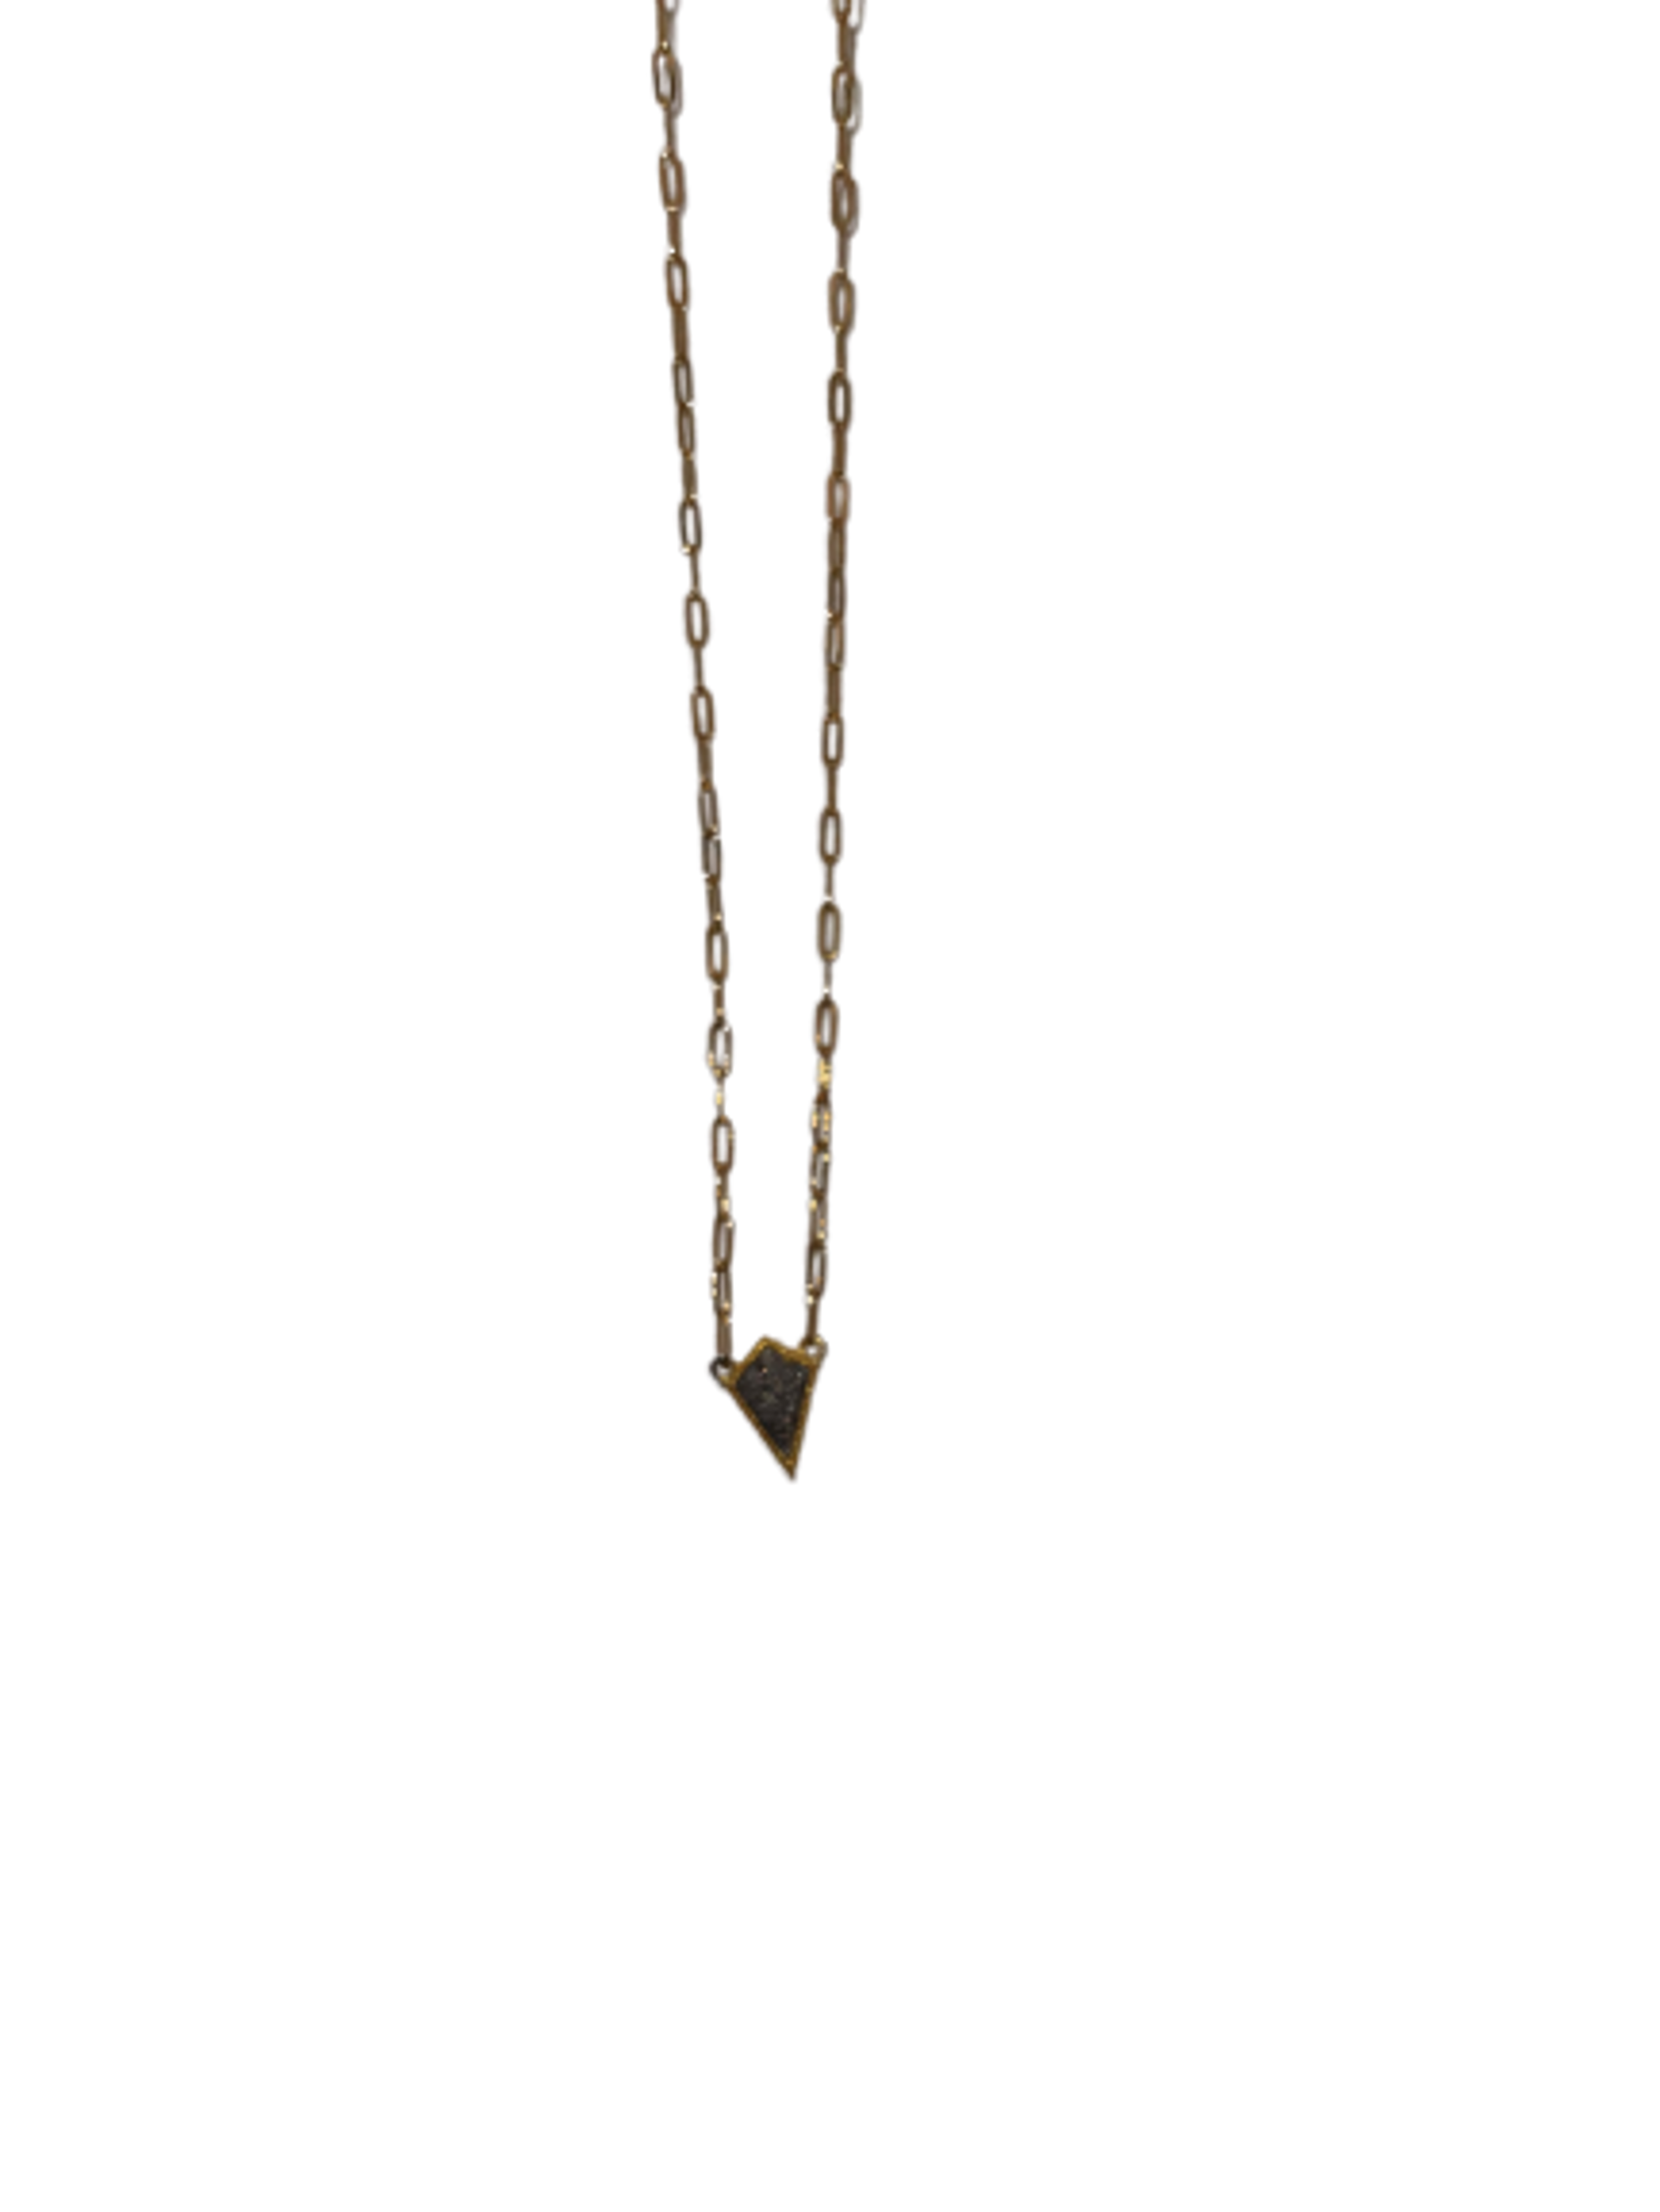 Gold Filled Paper Clip Chain Necklace with a Two-Tone Pave Diamond Pendant  shaped as a Diamond by Karen Birchmier